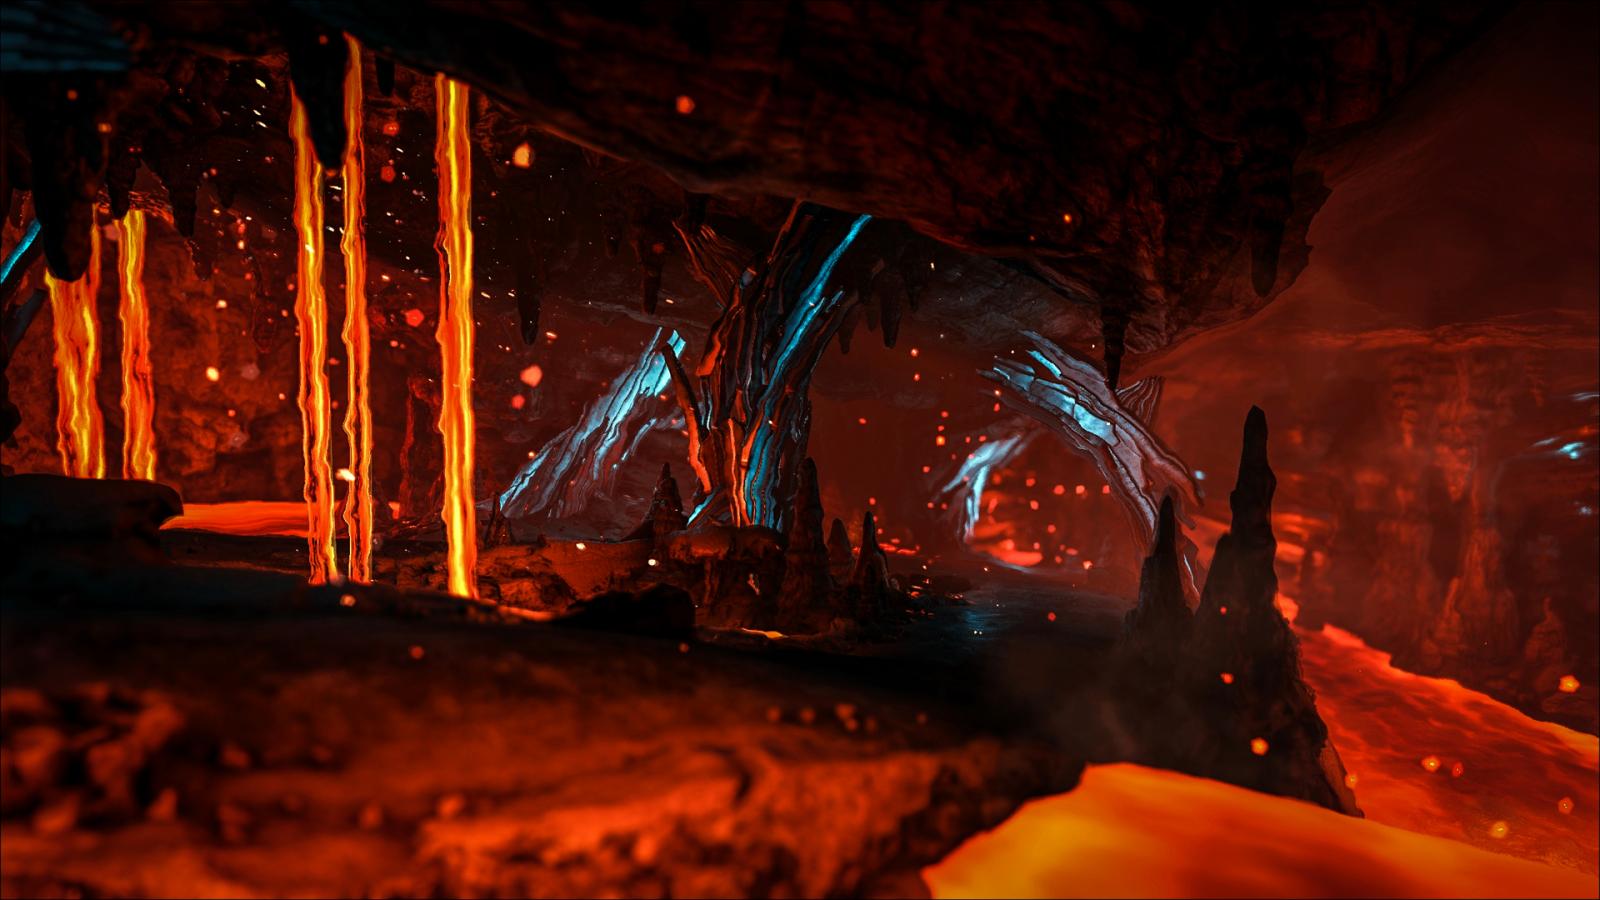 Caves Zh Official Ark Survival Evolved Wiki